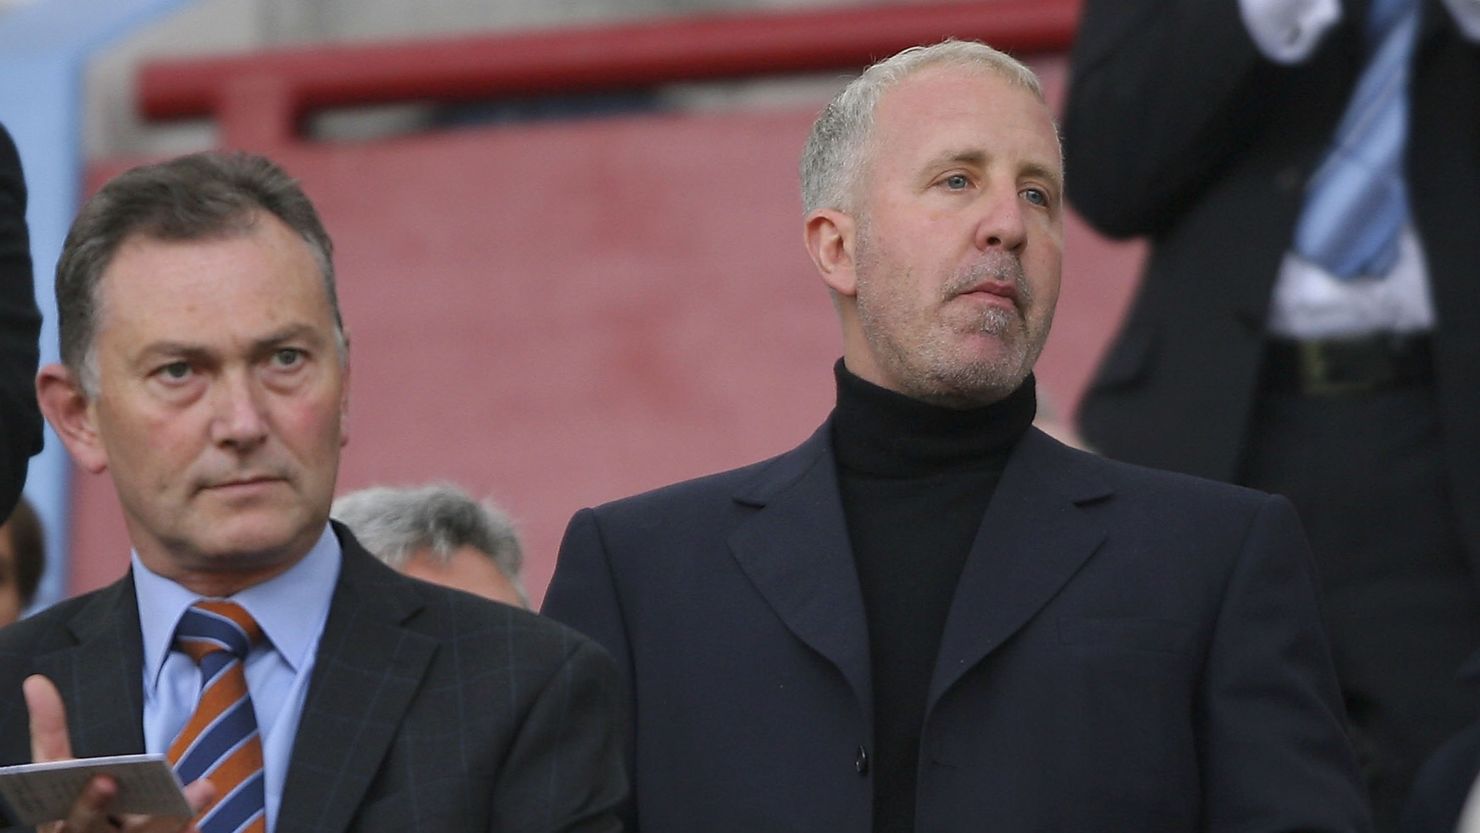 Aston Villa owner Randy Lerner (right) has put the English Premier League club up for sale.